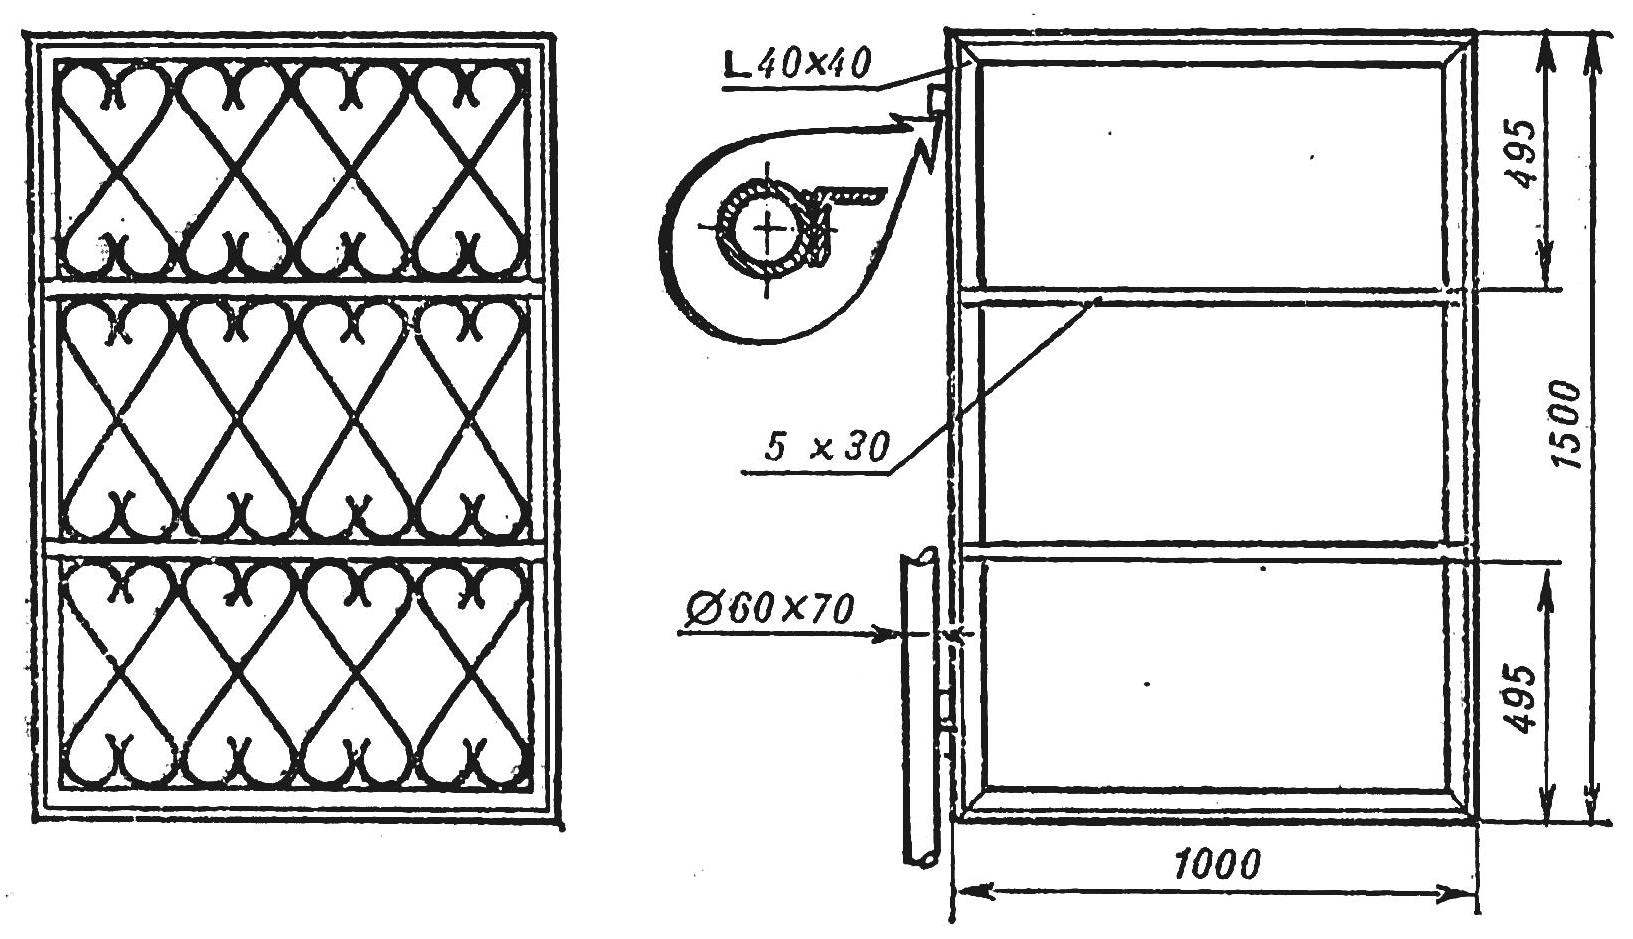 R and S. 1. Crate frame